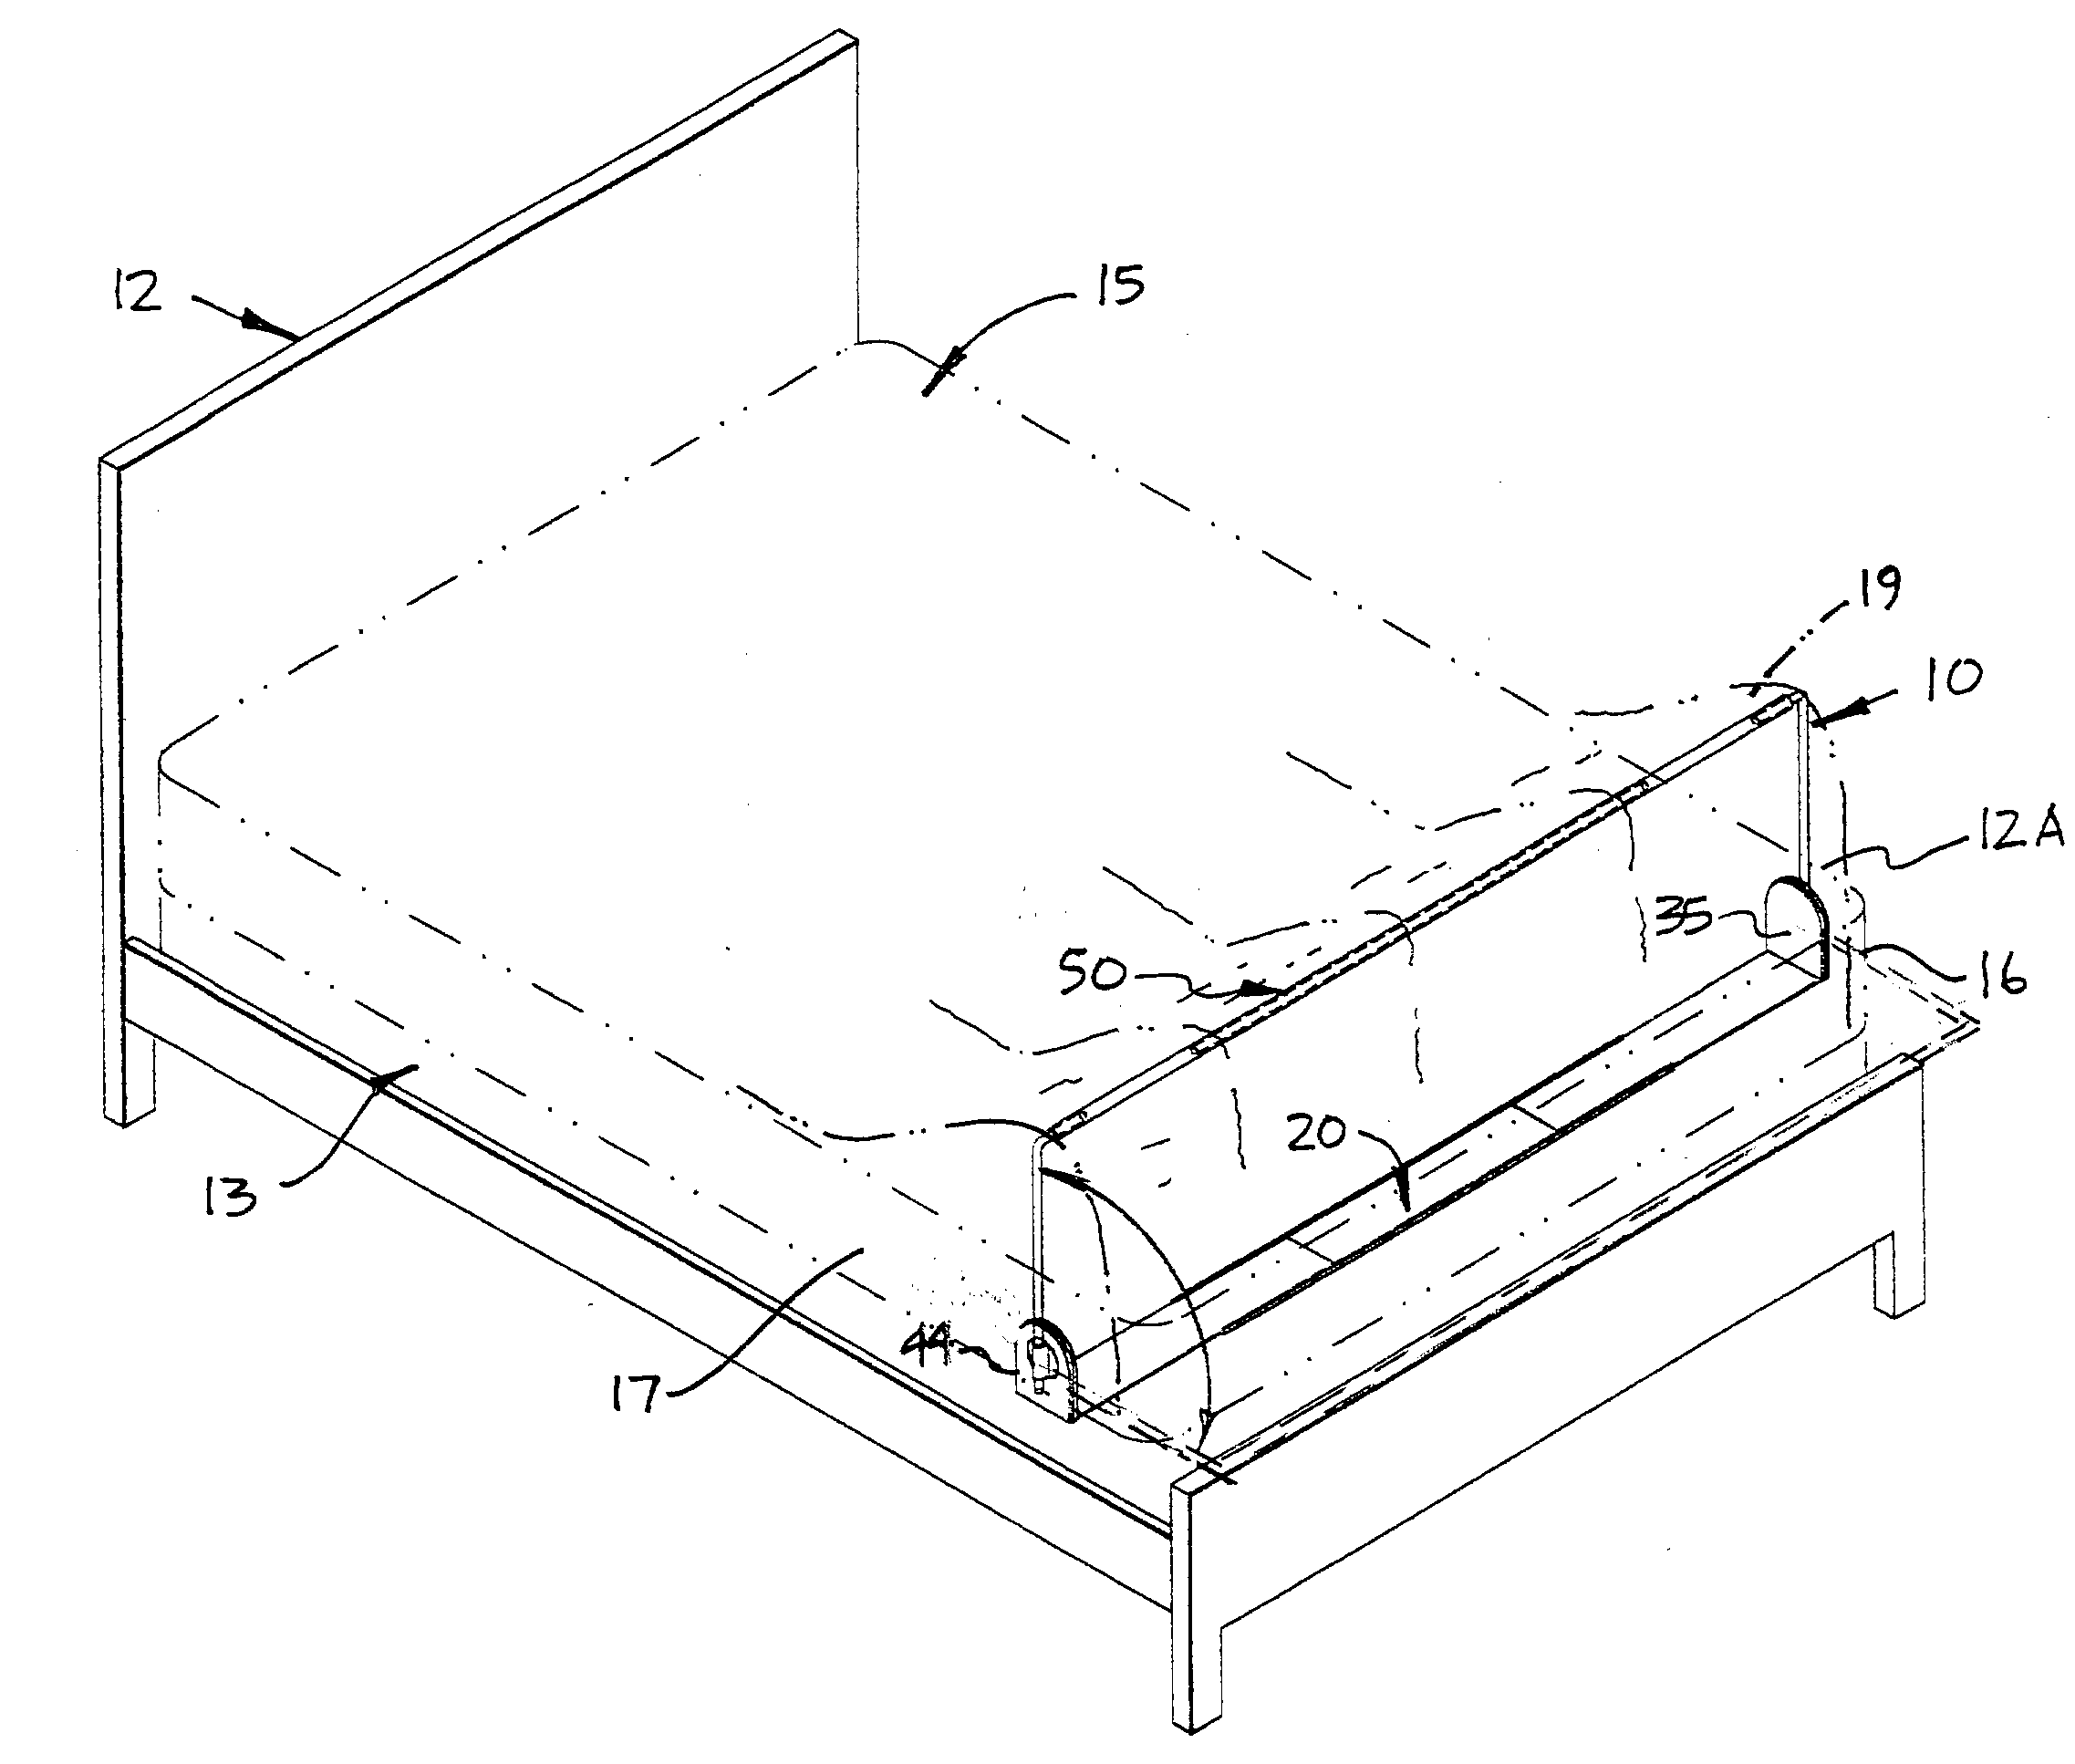 In-bed toe tent frame